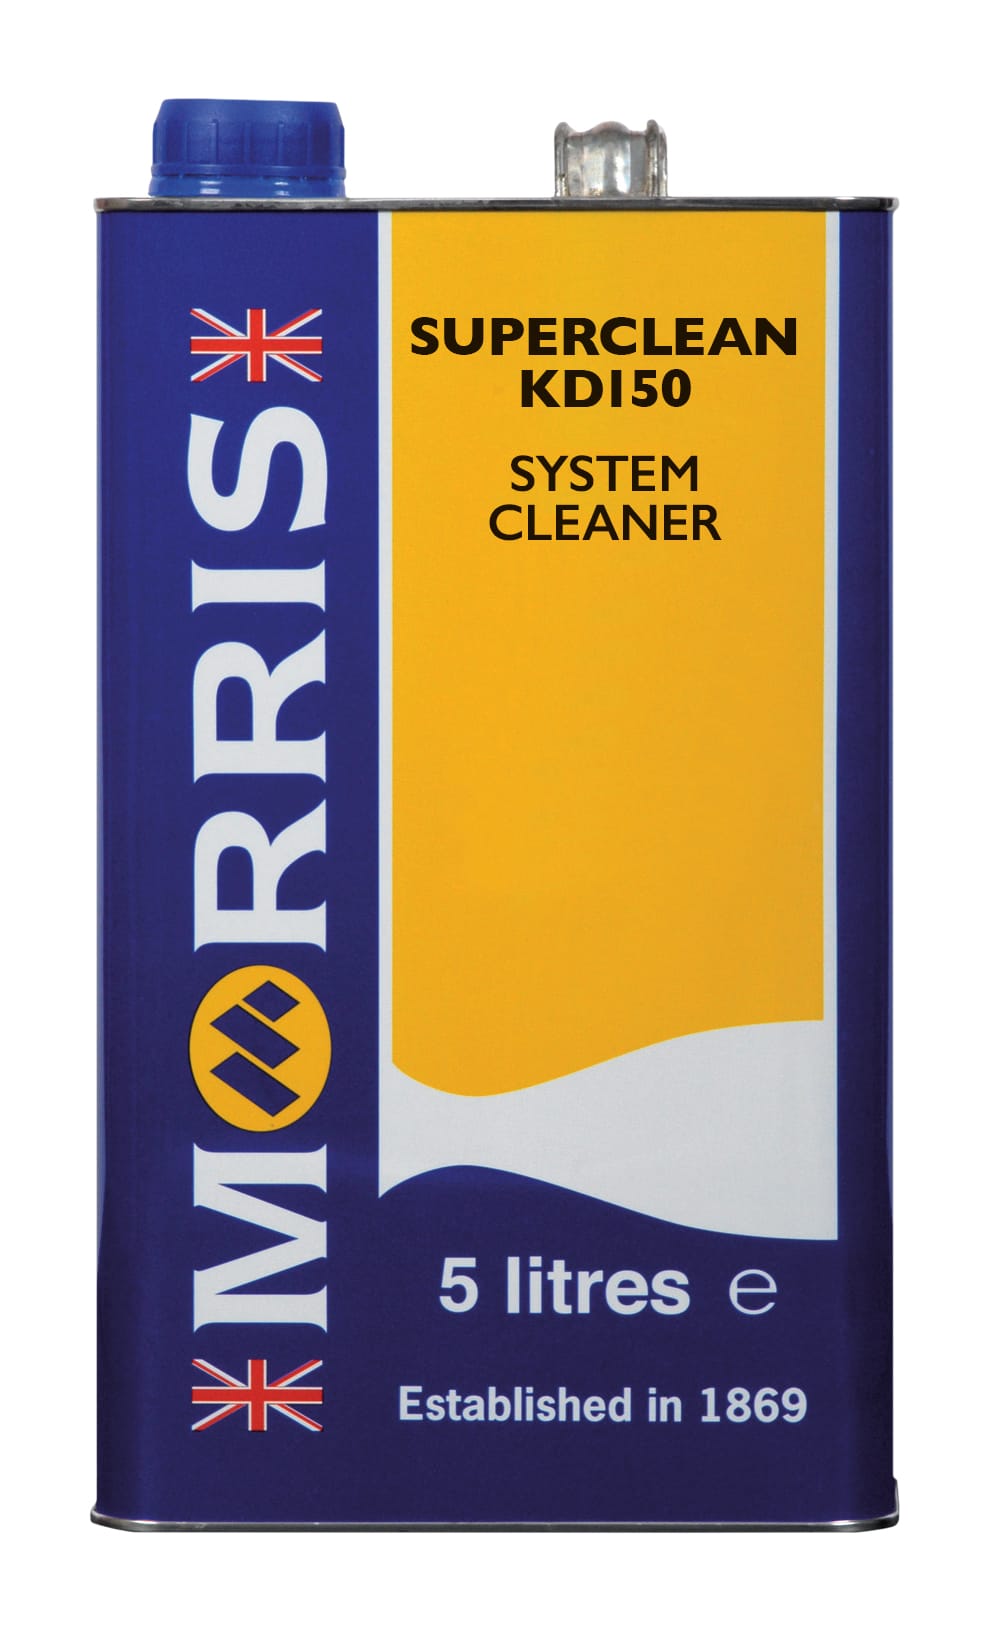 Superclean KD150 System Cleaner